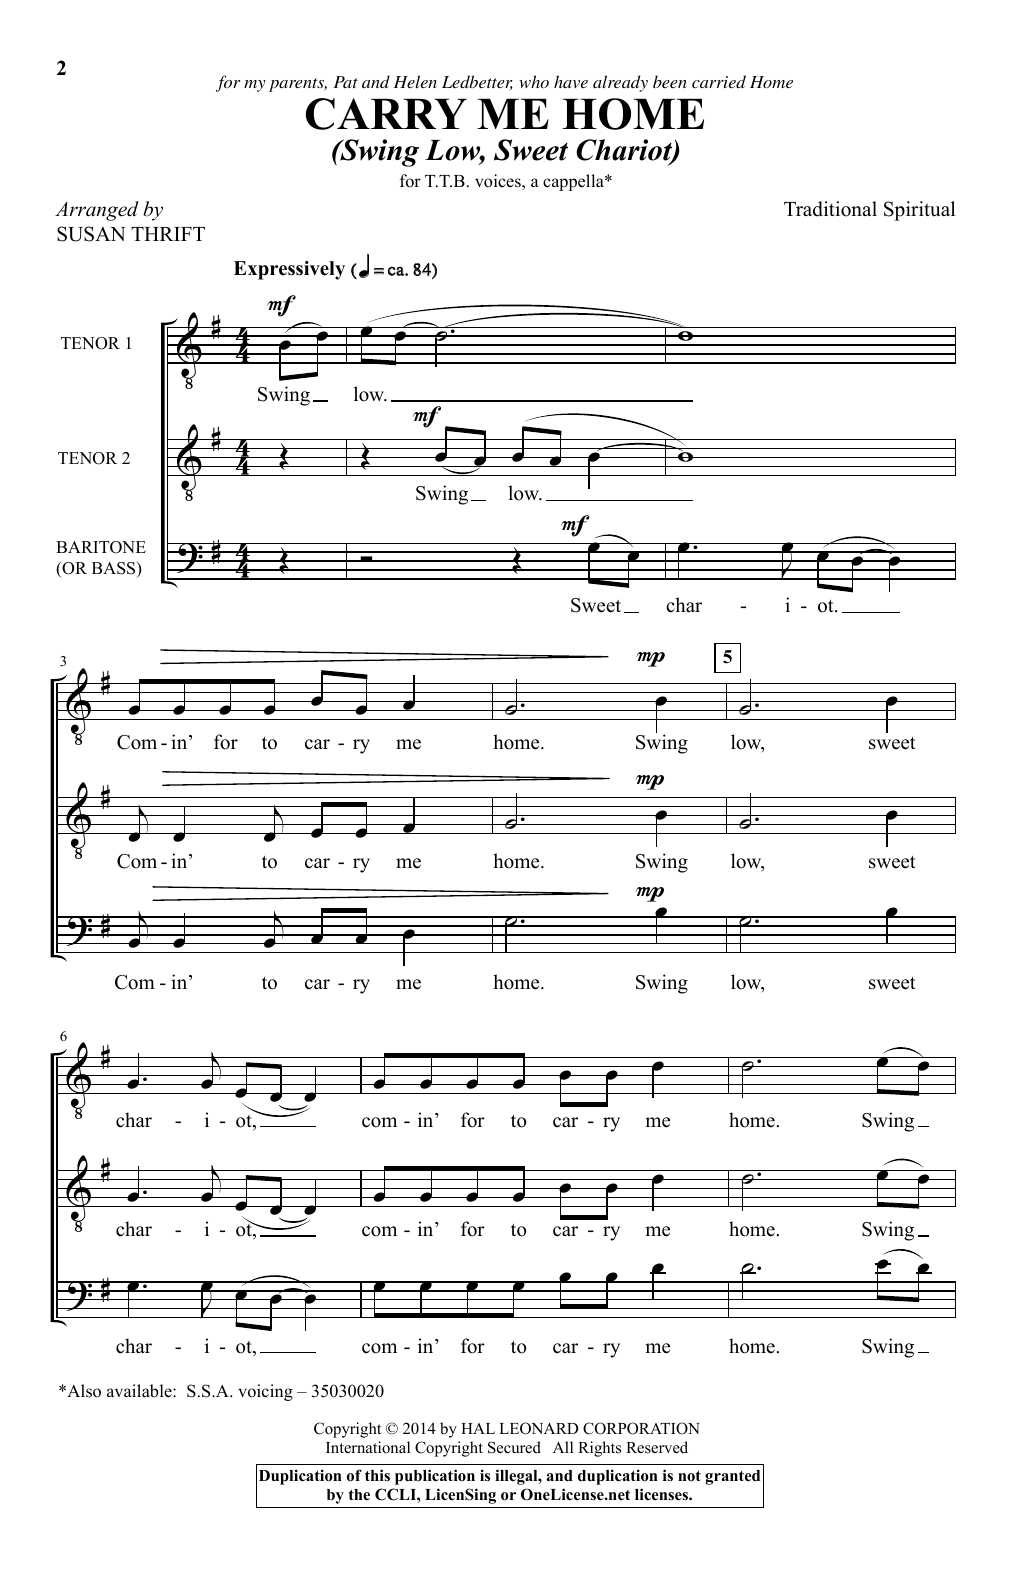 Download Susan Thrift Carry Me Home (Swing Low, Sweet Chariot Sheet Music